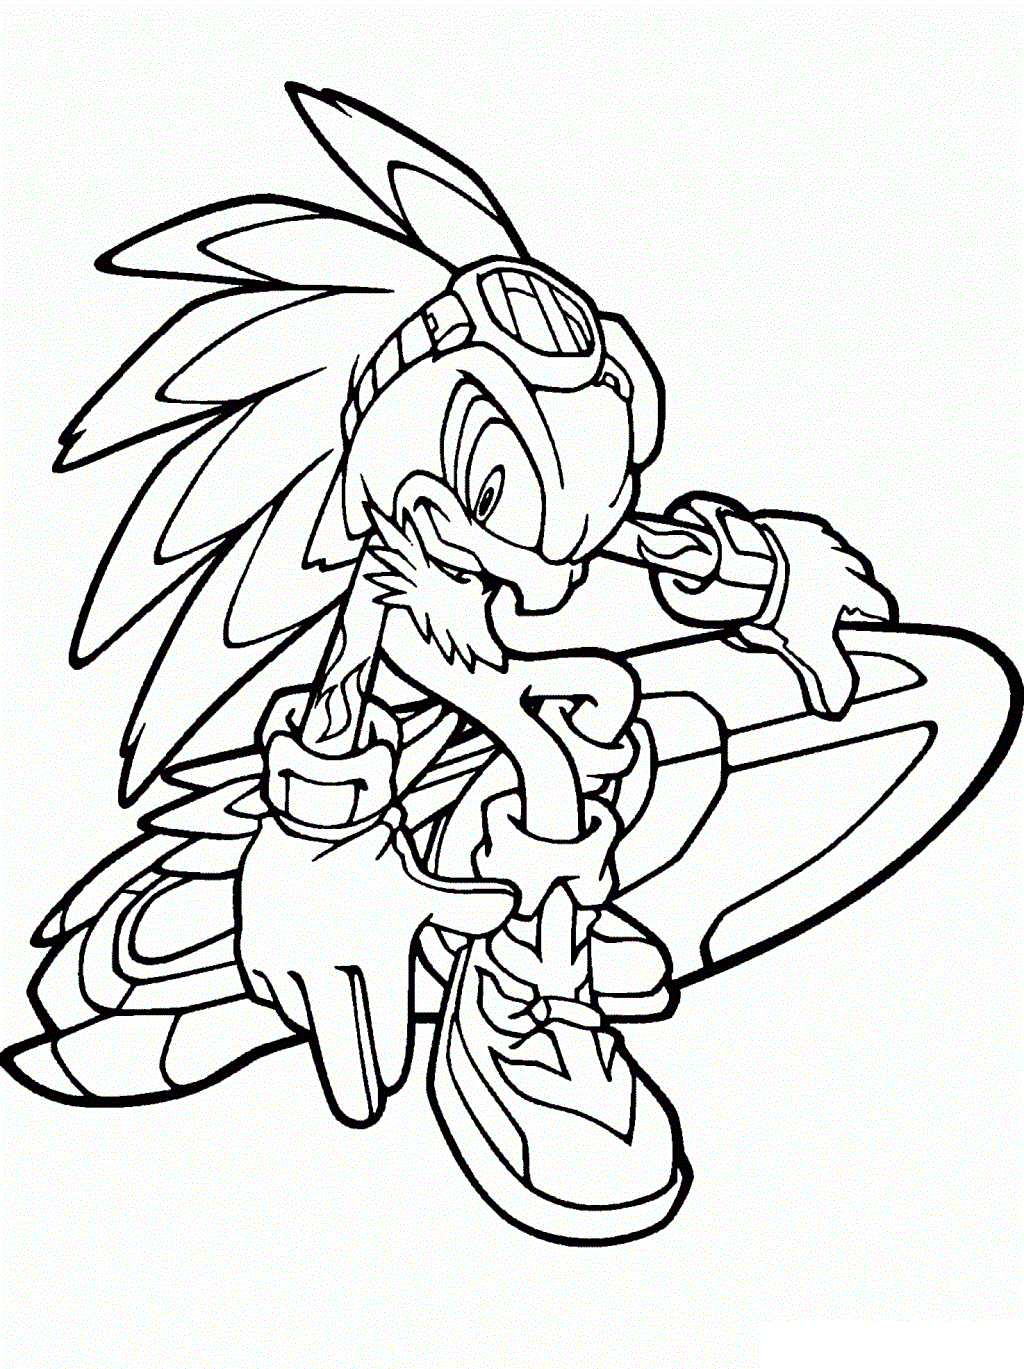 Jet The Hawk Coloring Page